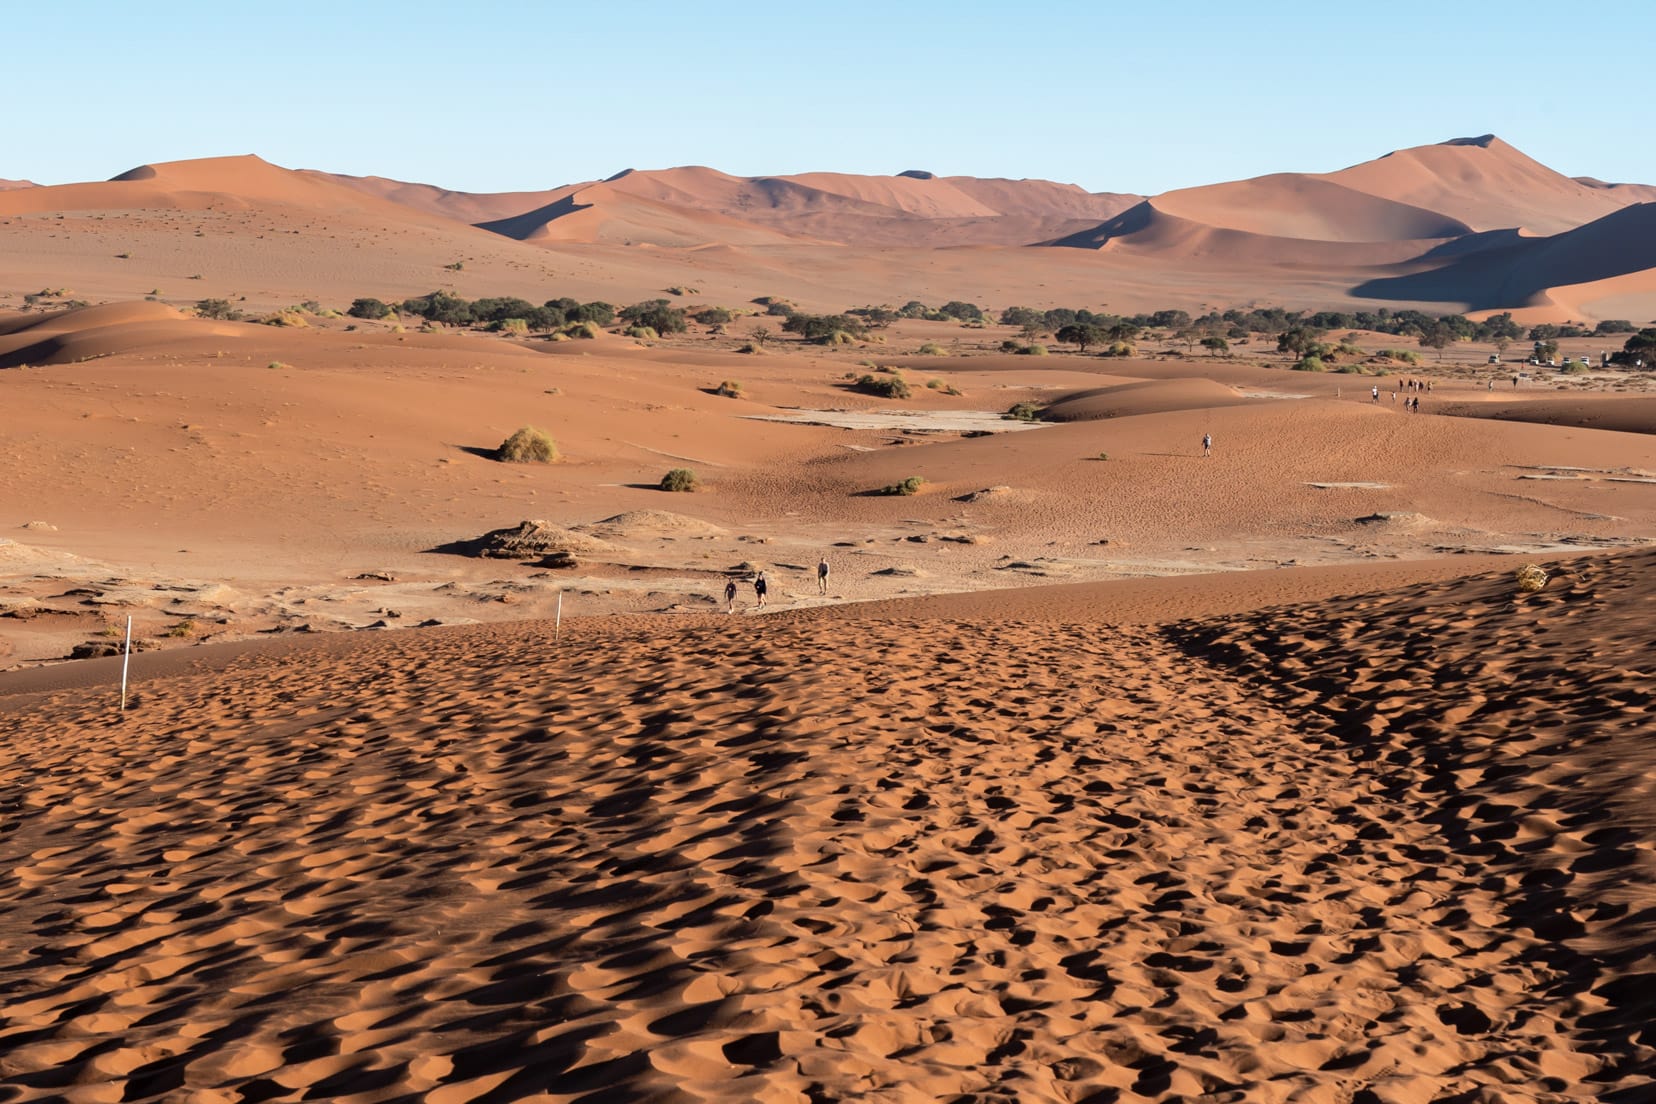 Tre trail to Deadvlei from teh car park over the sand dunes